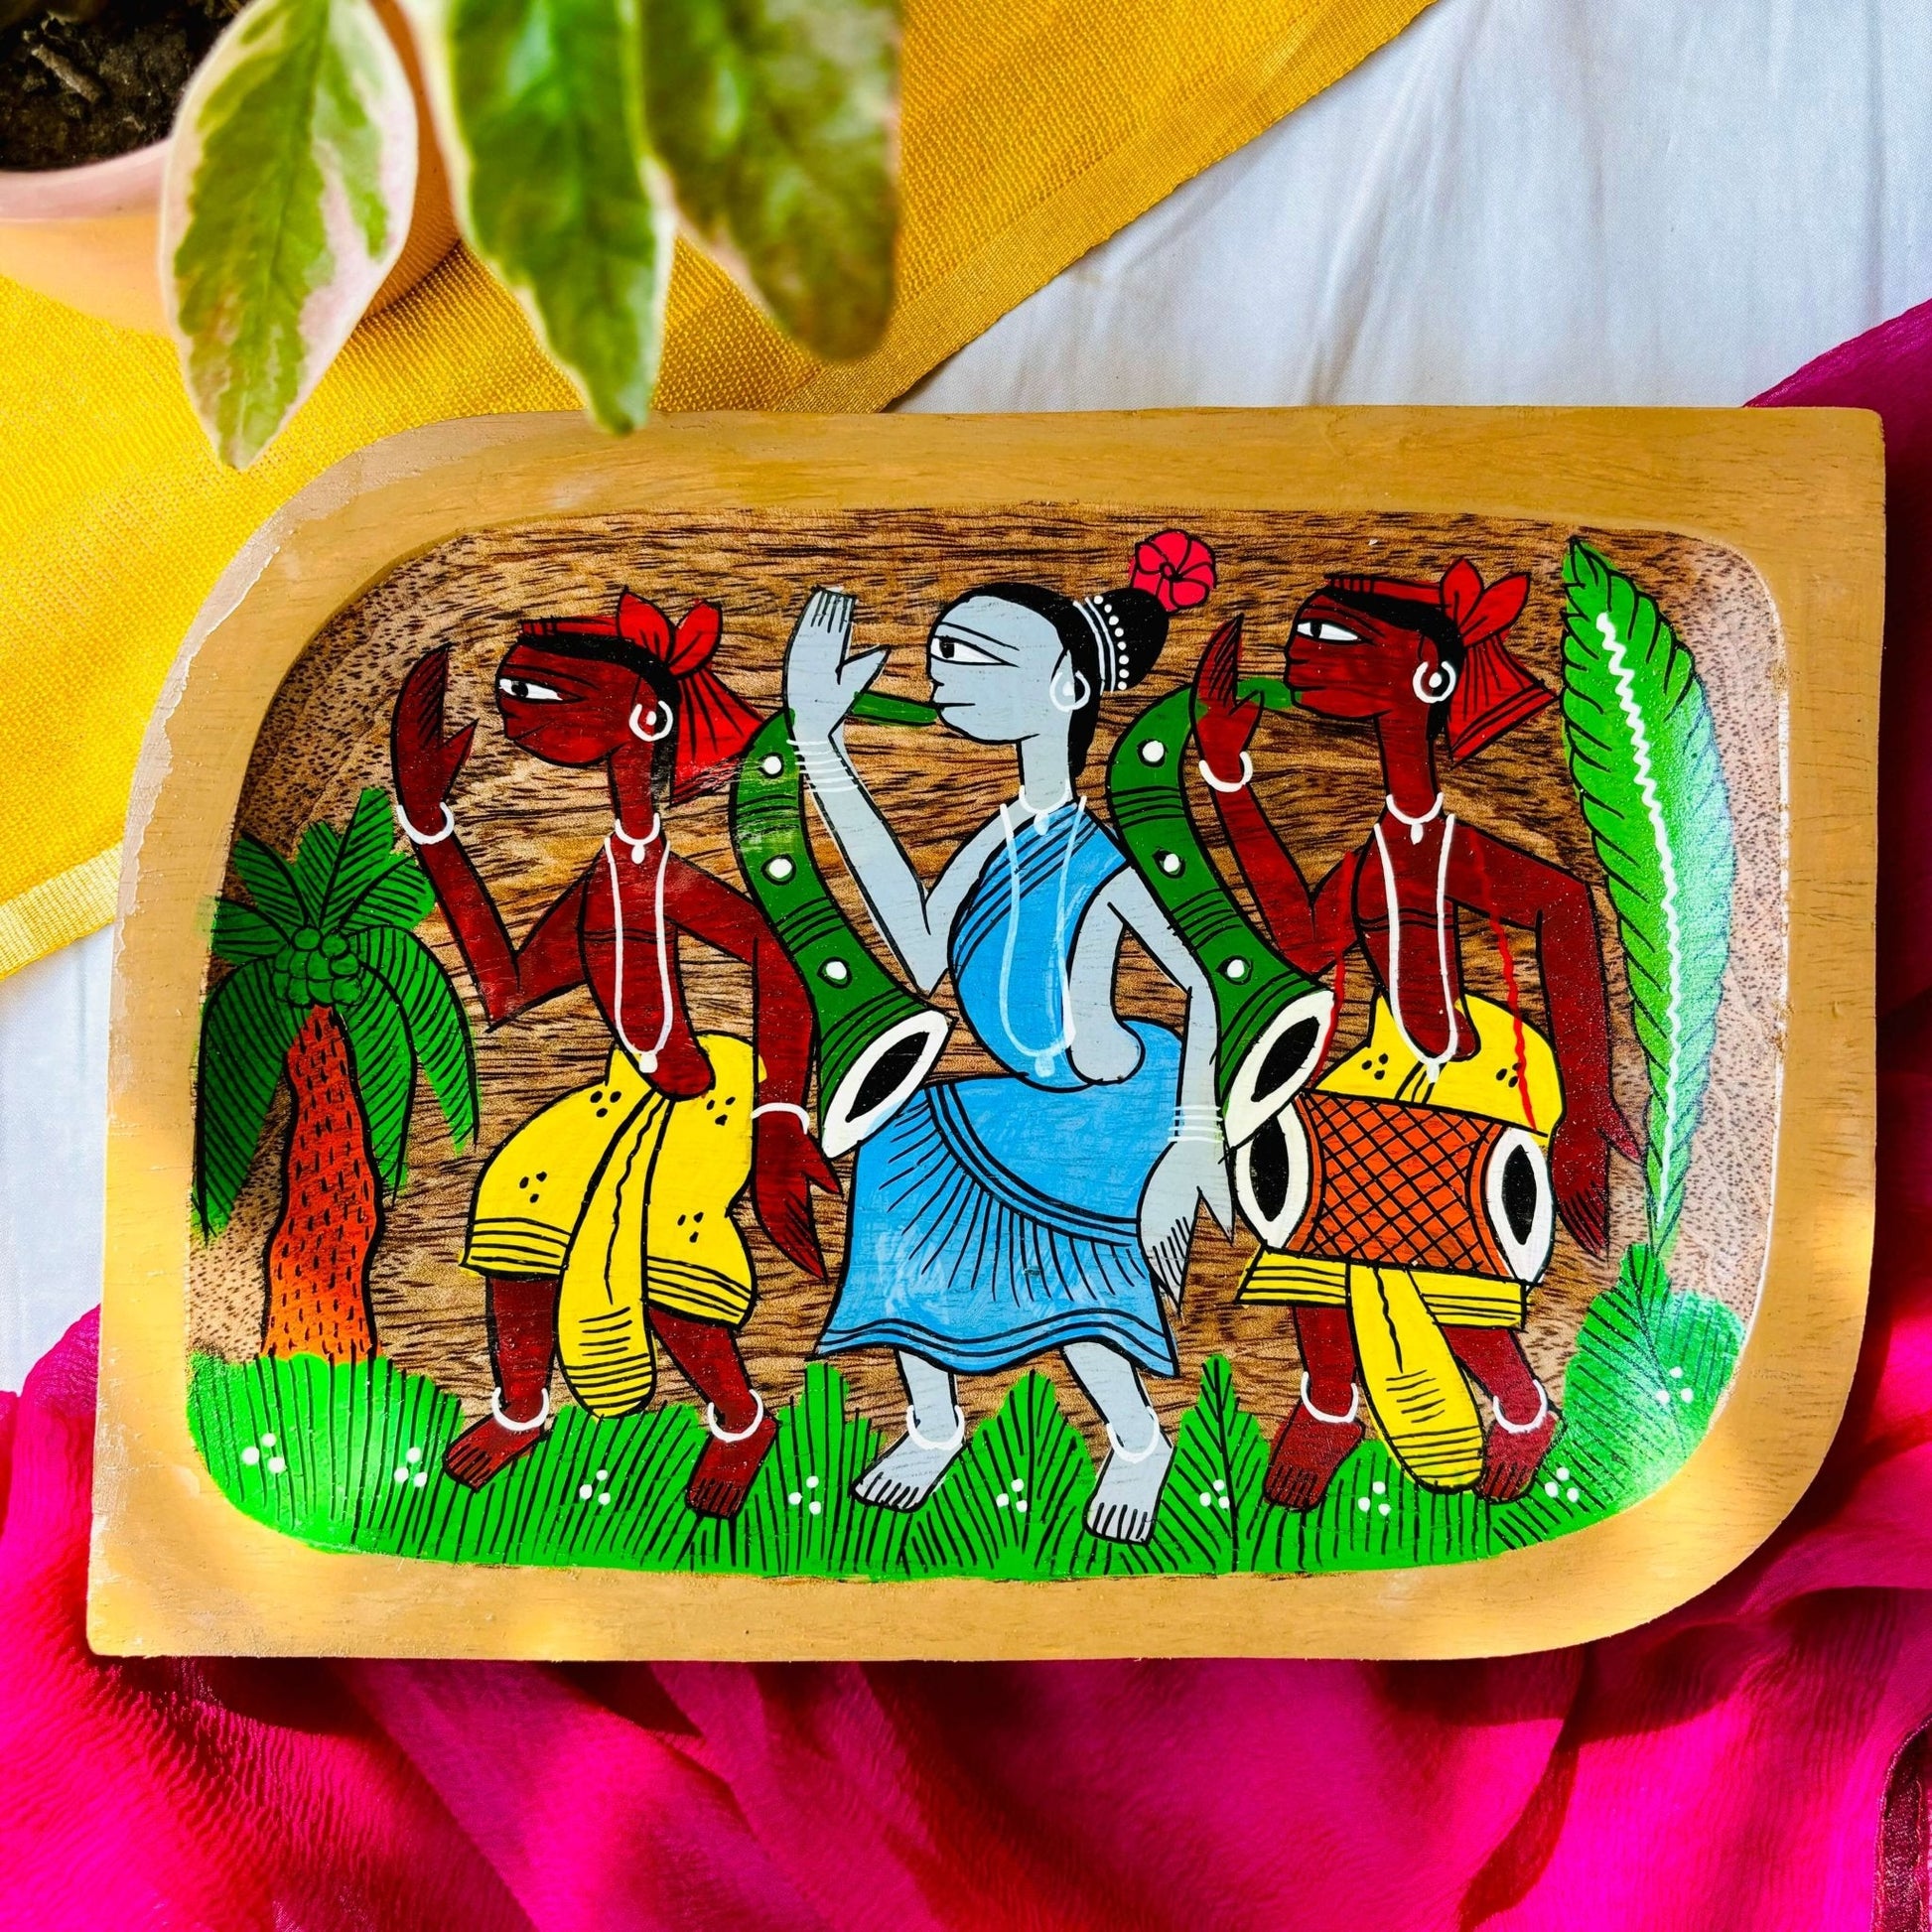 Pure mango wood square wood serving tray/trinket tray hand-painted with a motif of two tribal men wearing yellow clothes and a tribal woman wearing a blue dress dancing in a field with a coconut tree